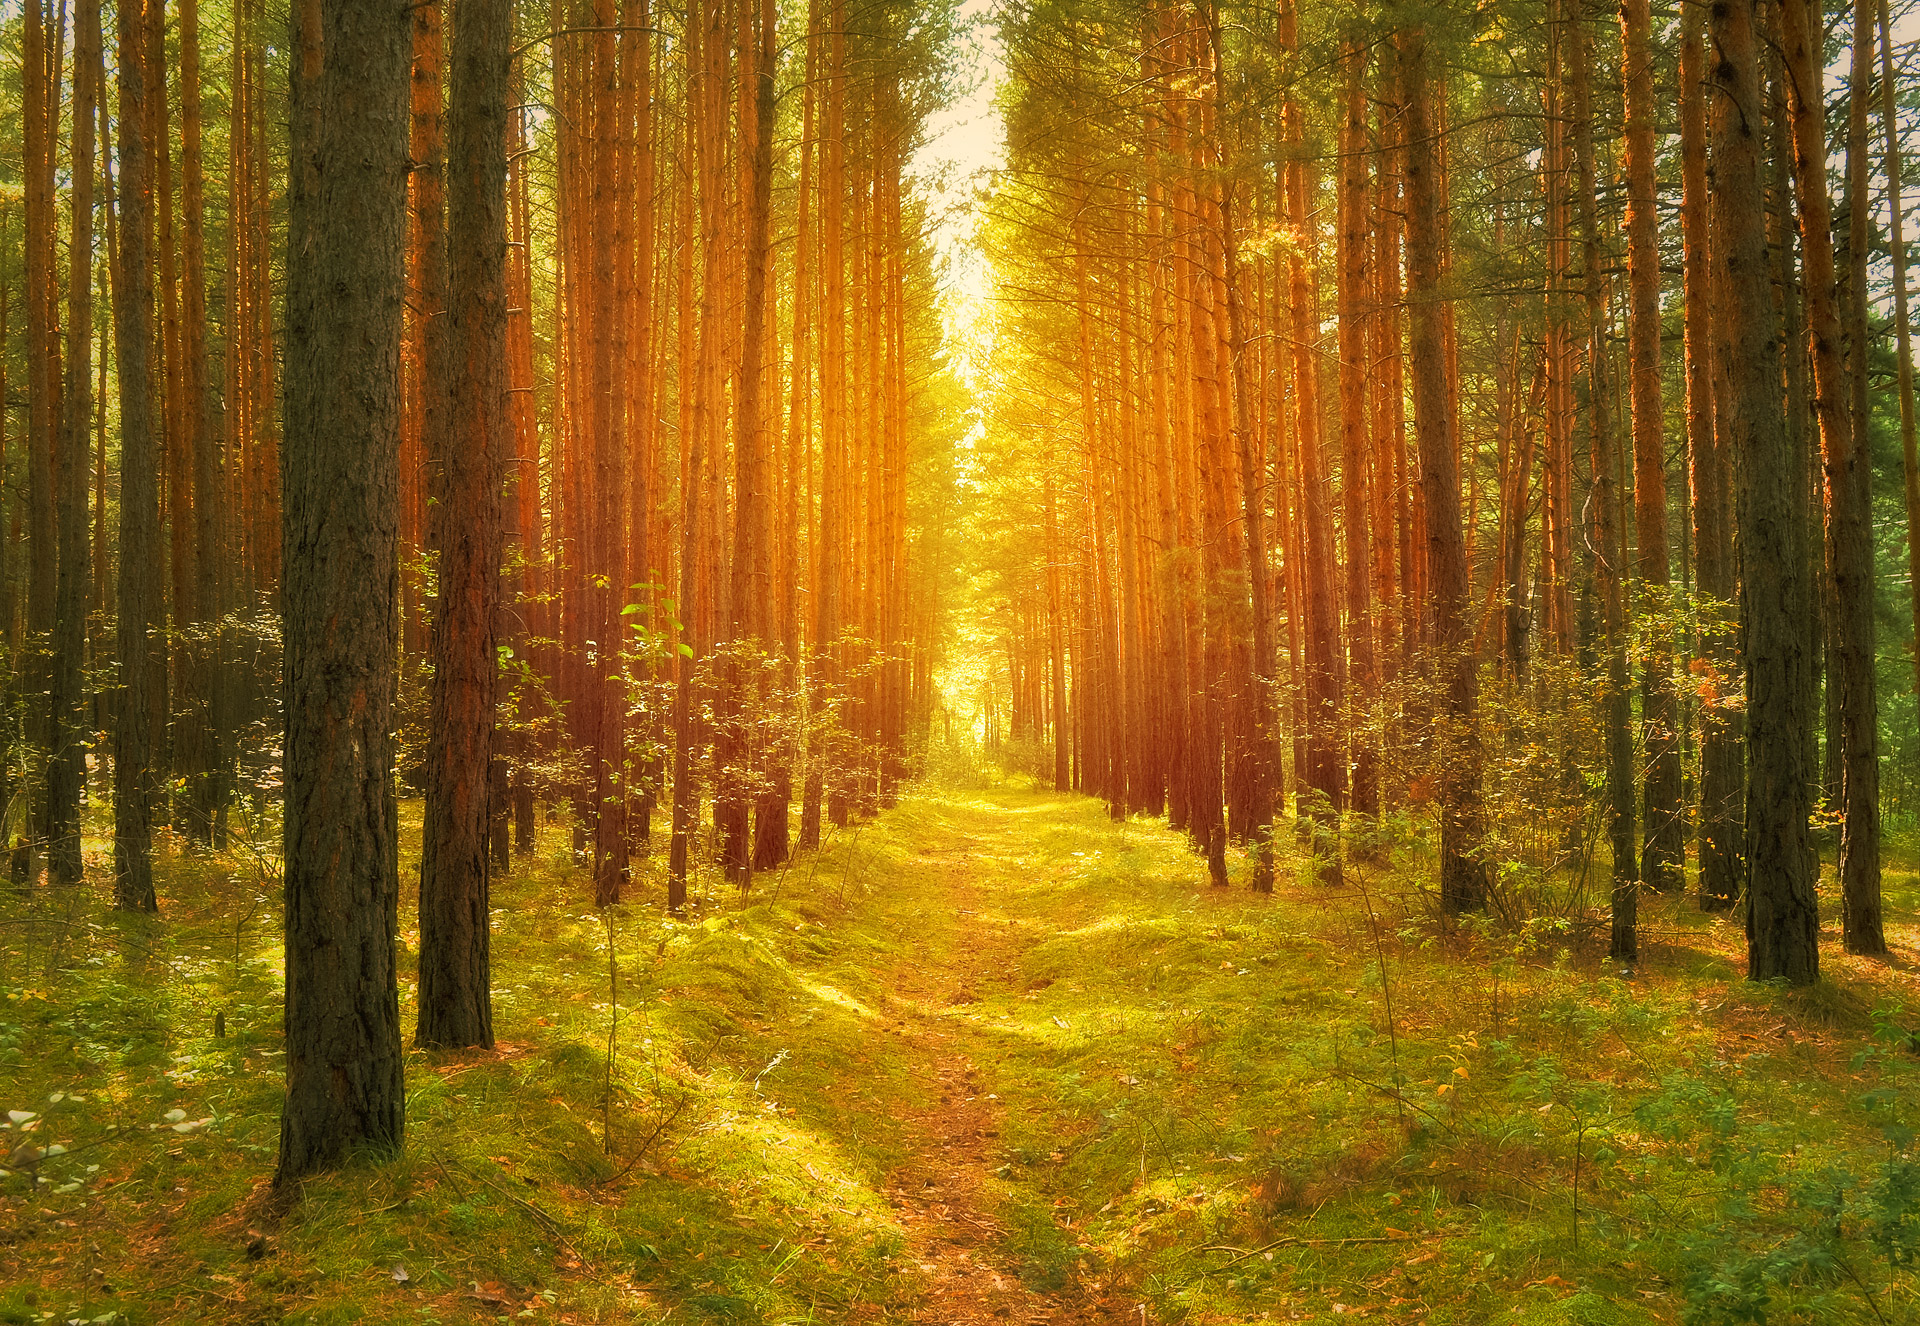 sunlight, bright, earth, forest, nature, path, pine tree, tree